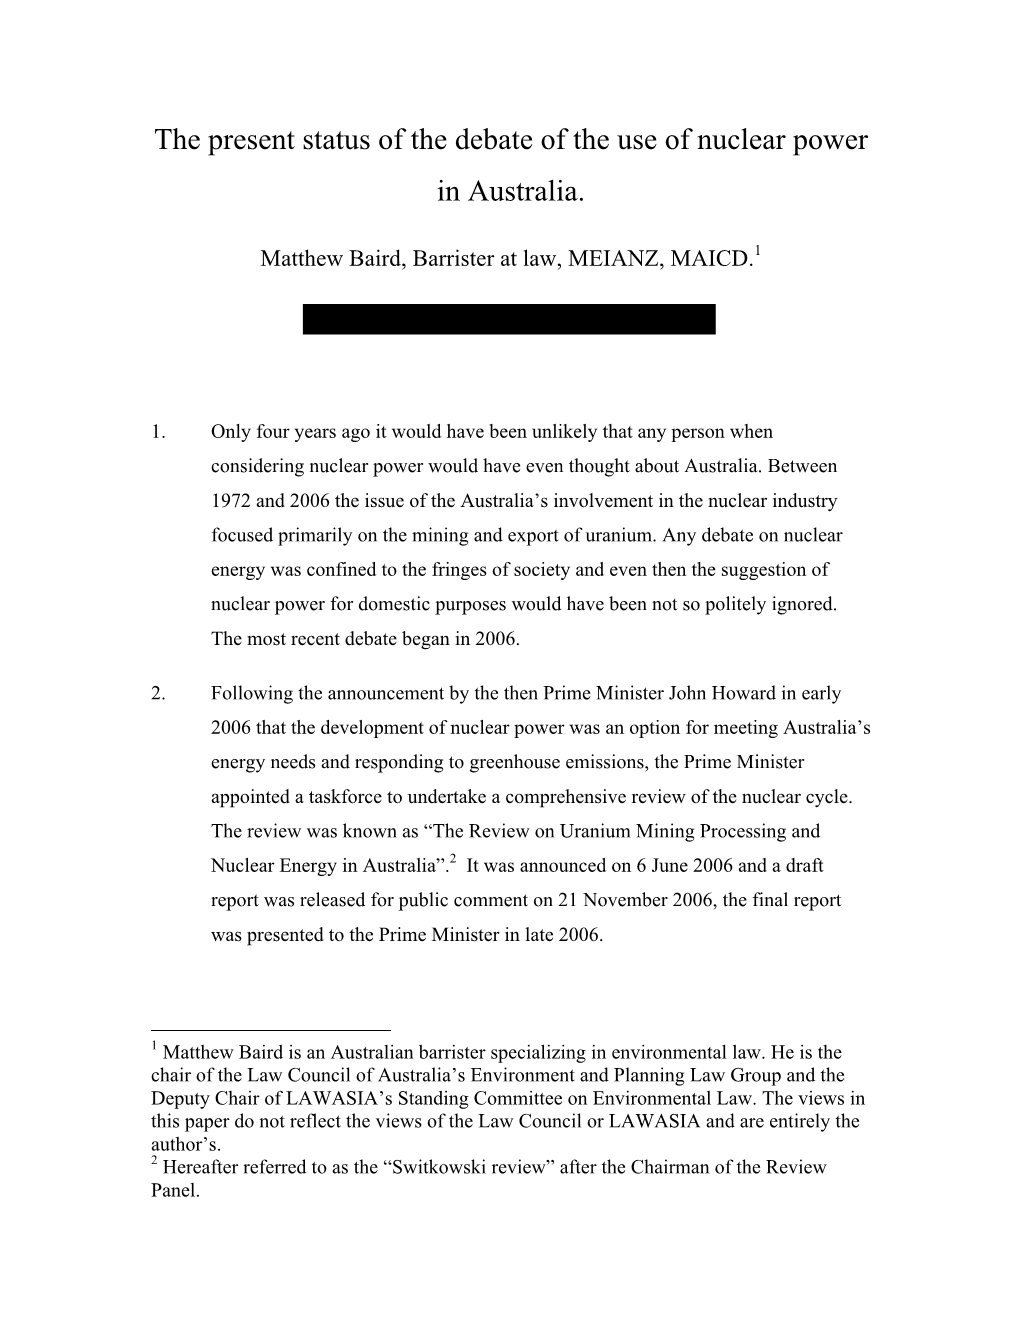 The Present Status of the Debate of the Use of Nuclear Power in Australia